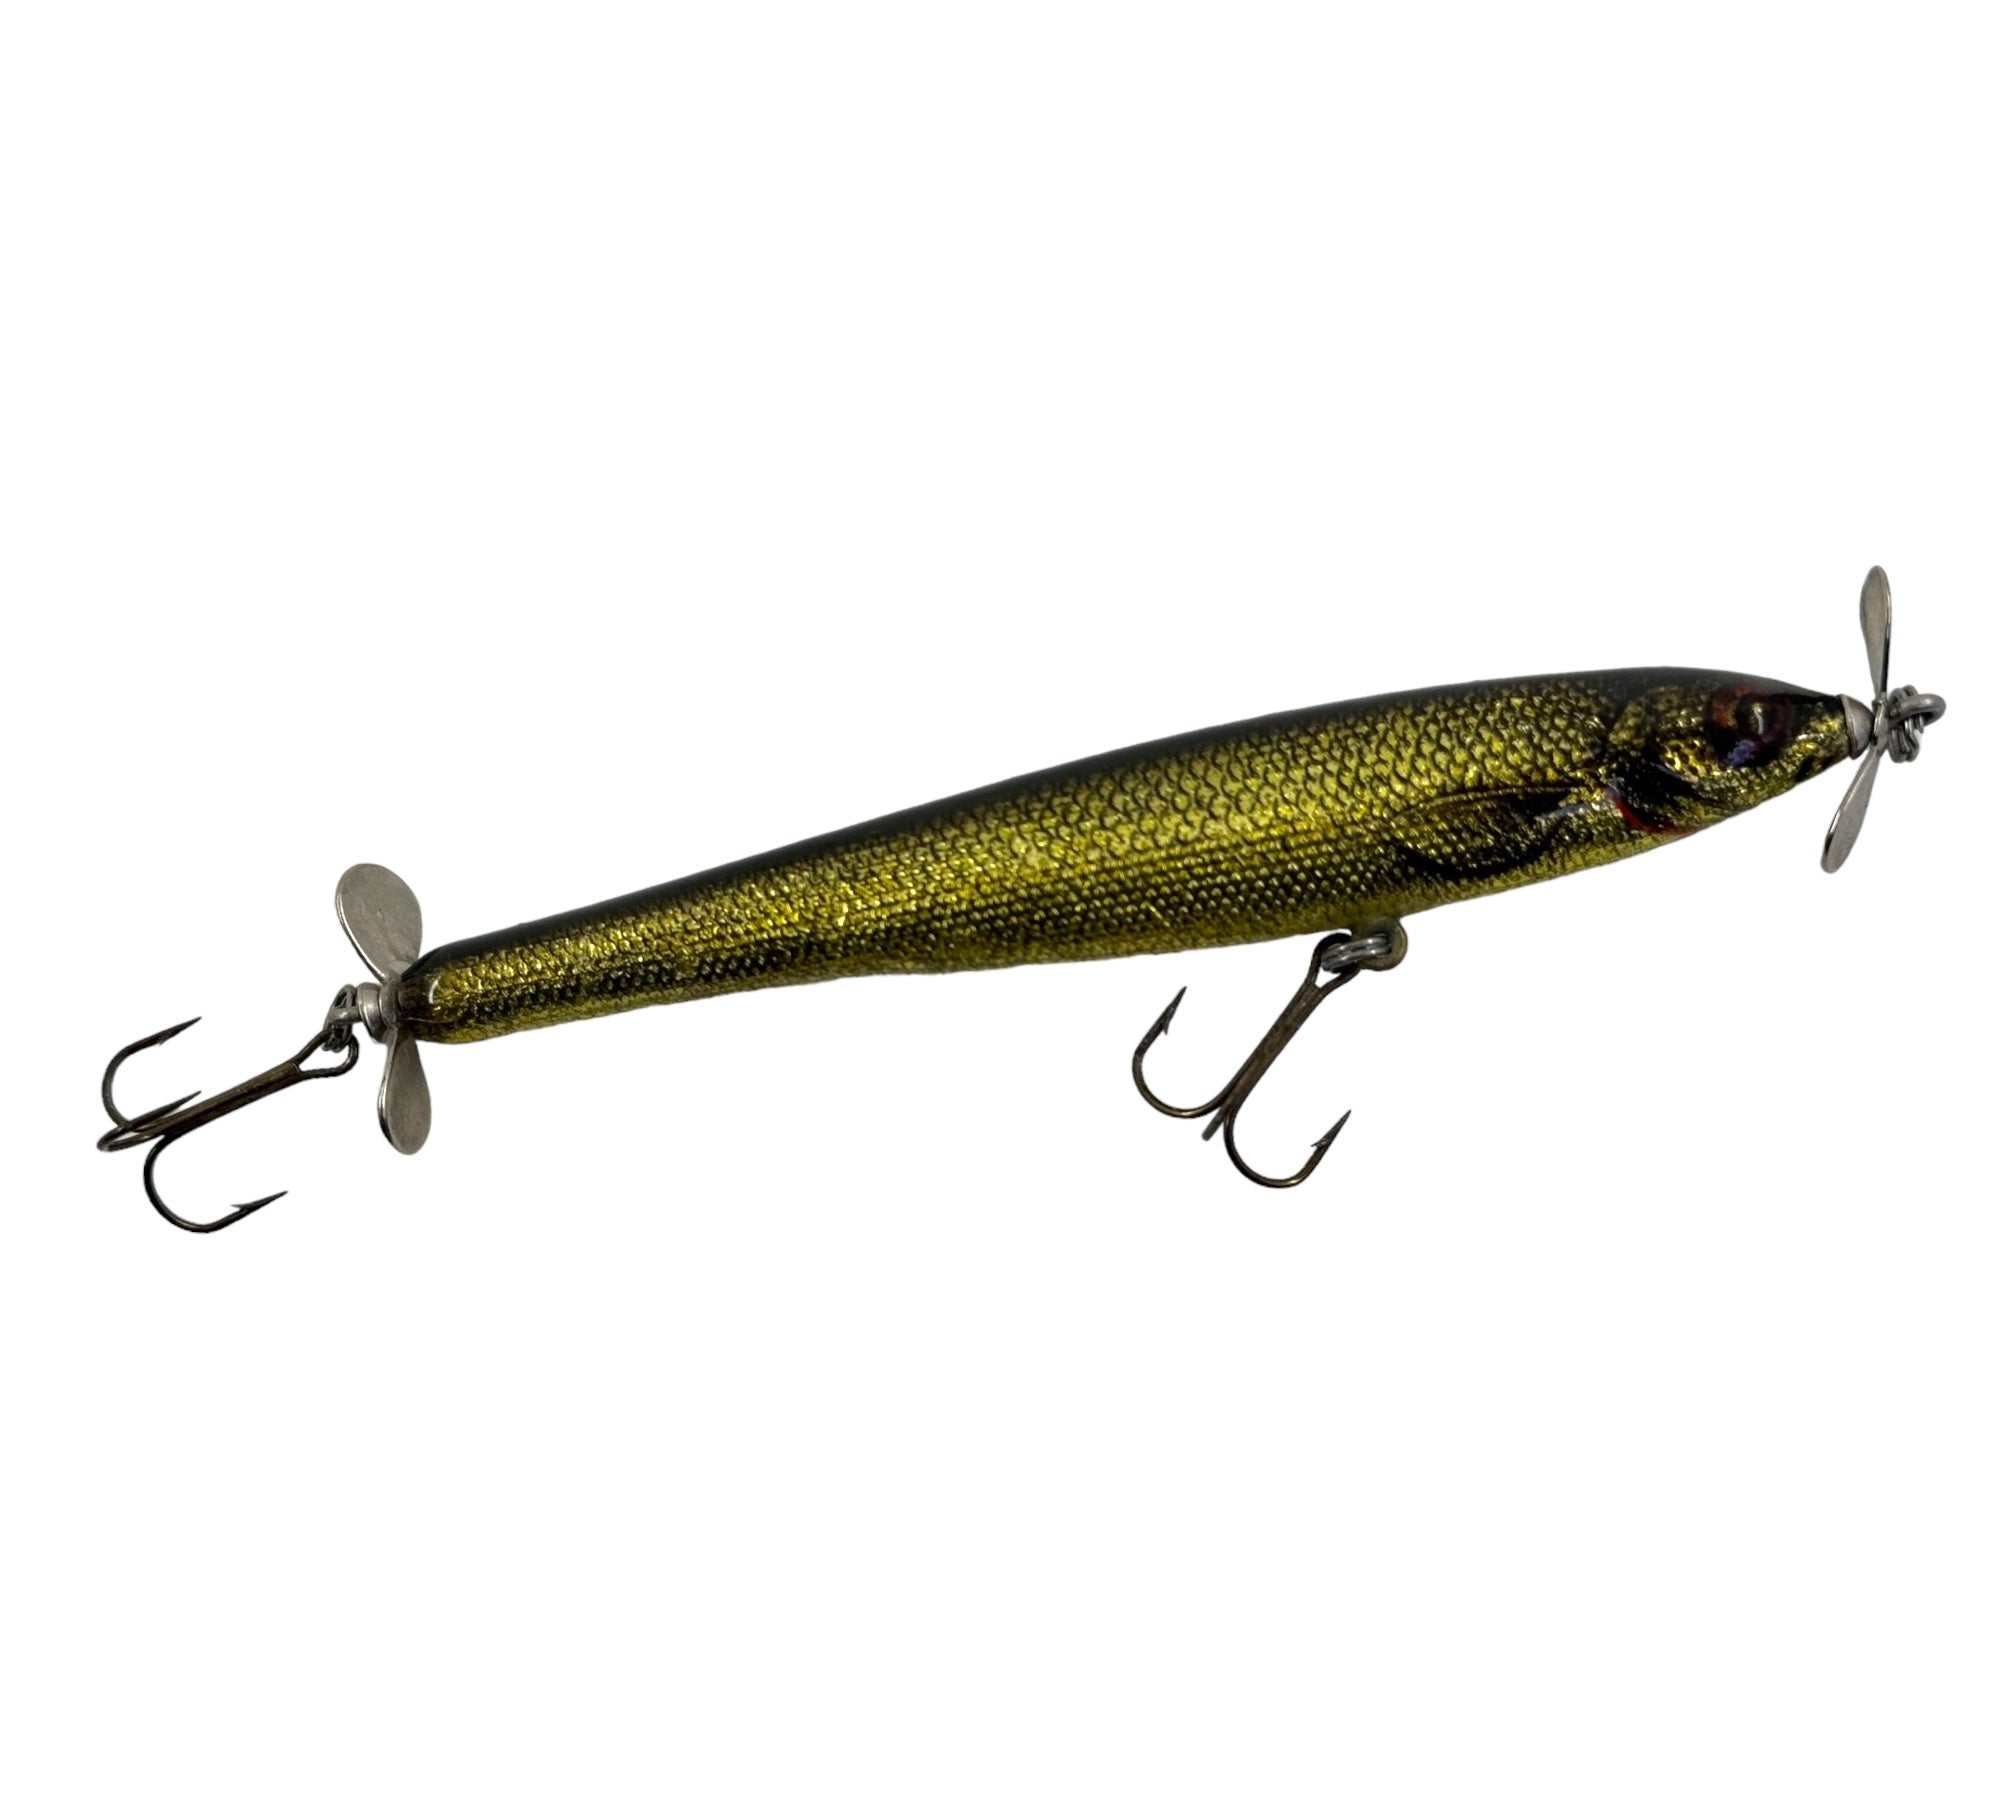 BAGLEY TWIN SPINNER MINNOW Fishing Lure • BLACK on GOLD FOIL